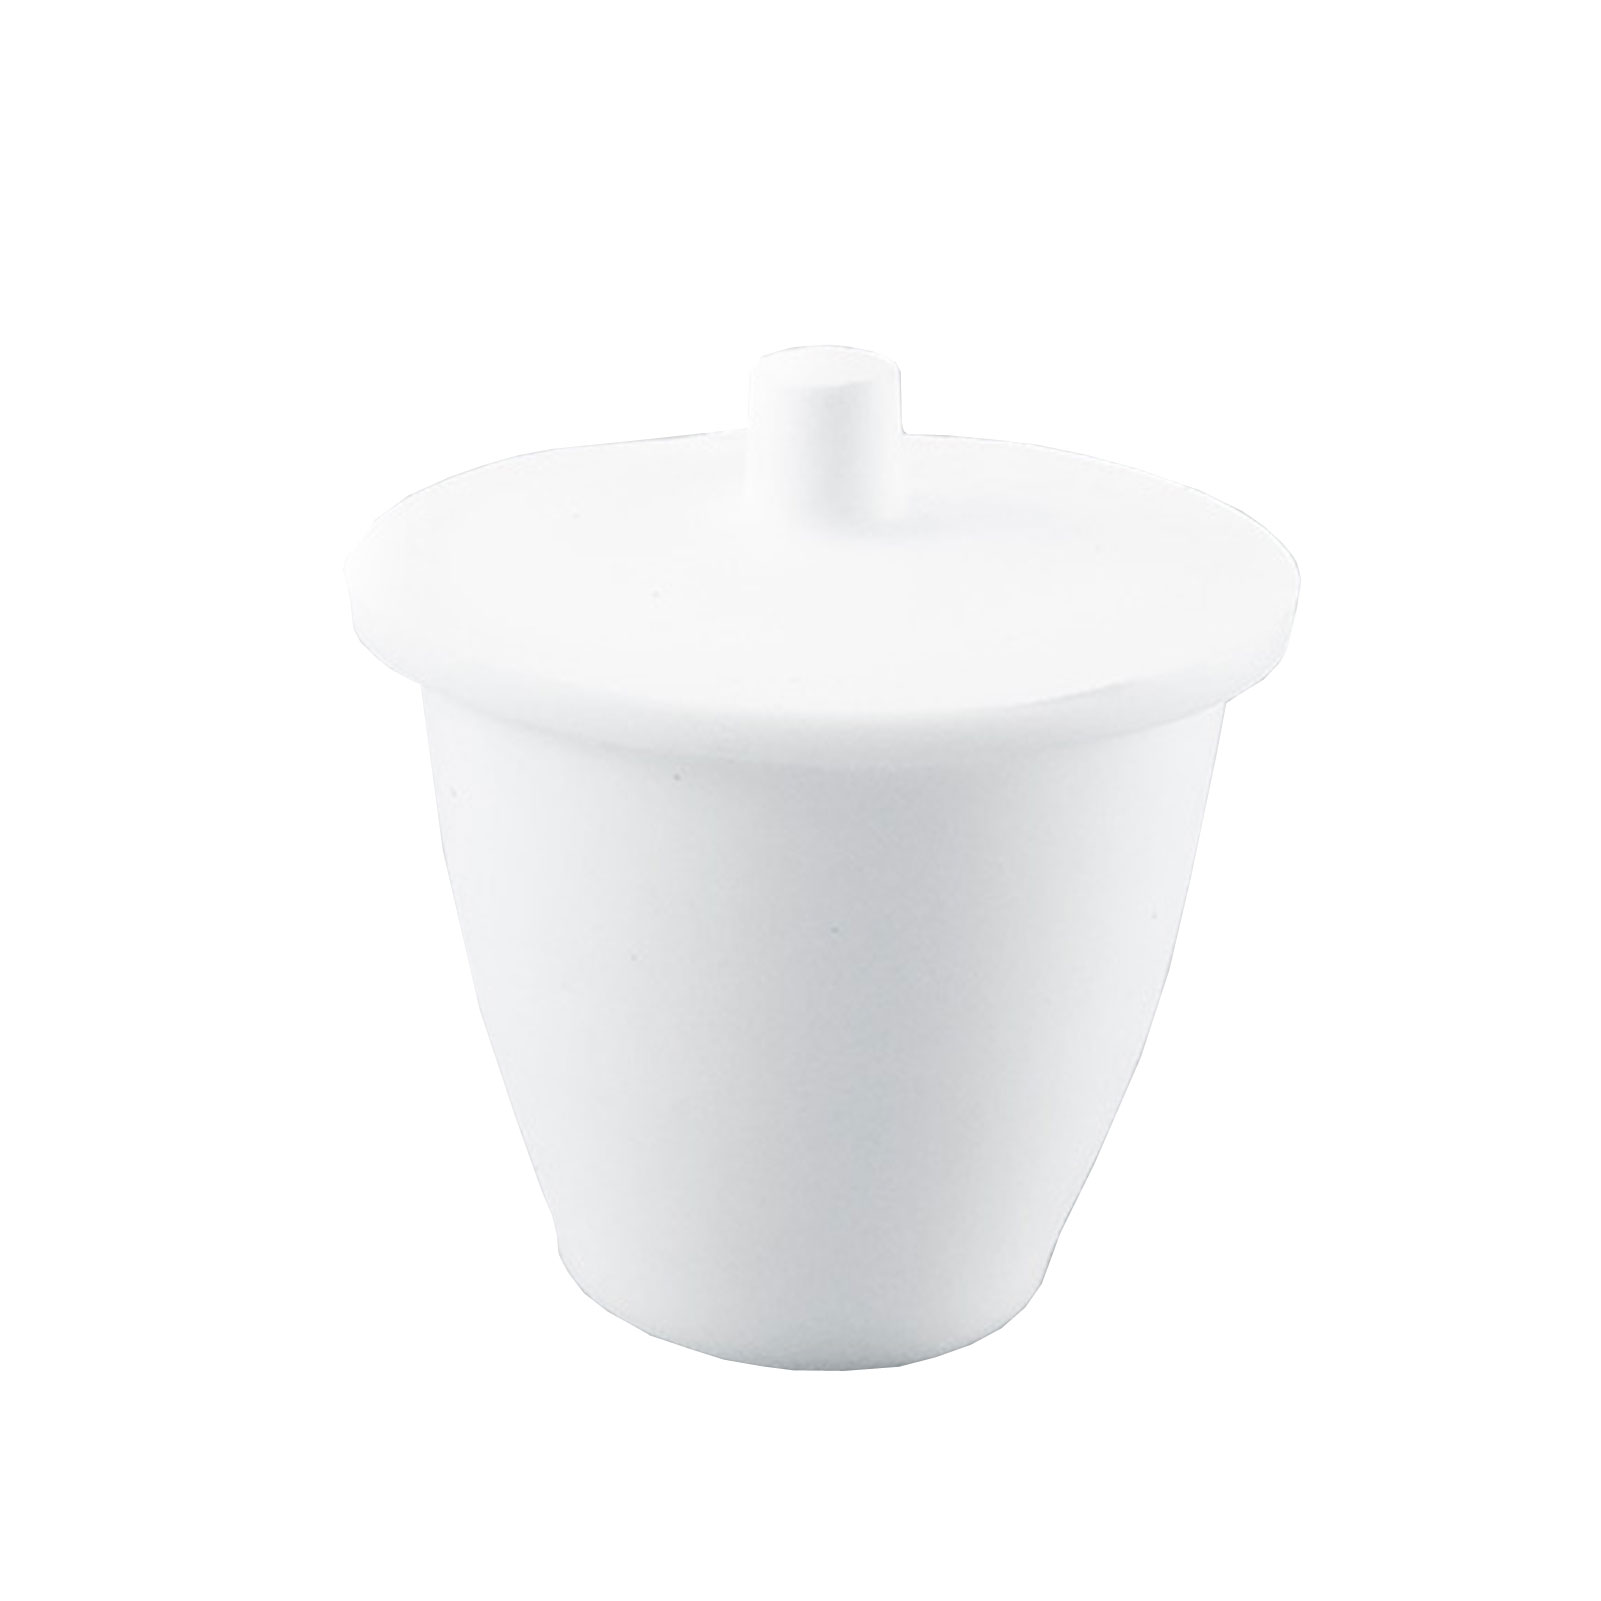 ADAMAS BETA Lab Teflon Crucible with Cap 20-200ml Covered PTFE Crucible for Laboratory Solvent Eevaporation/Crystallization Experiments